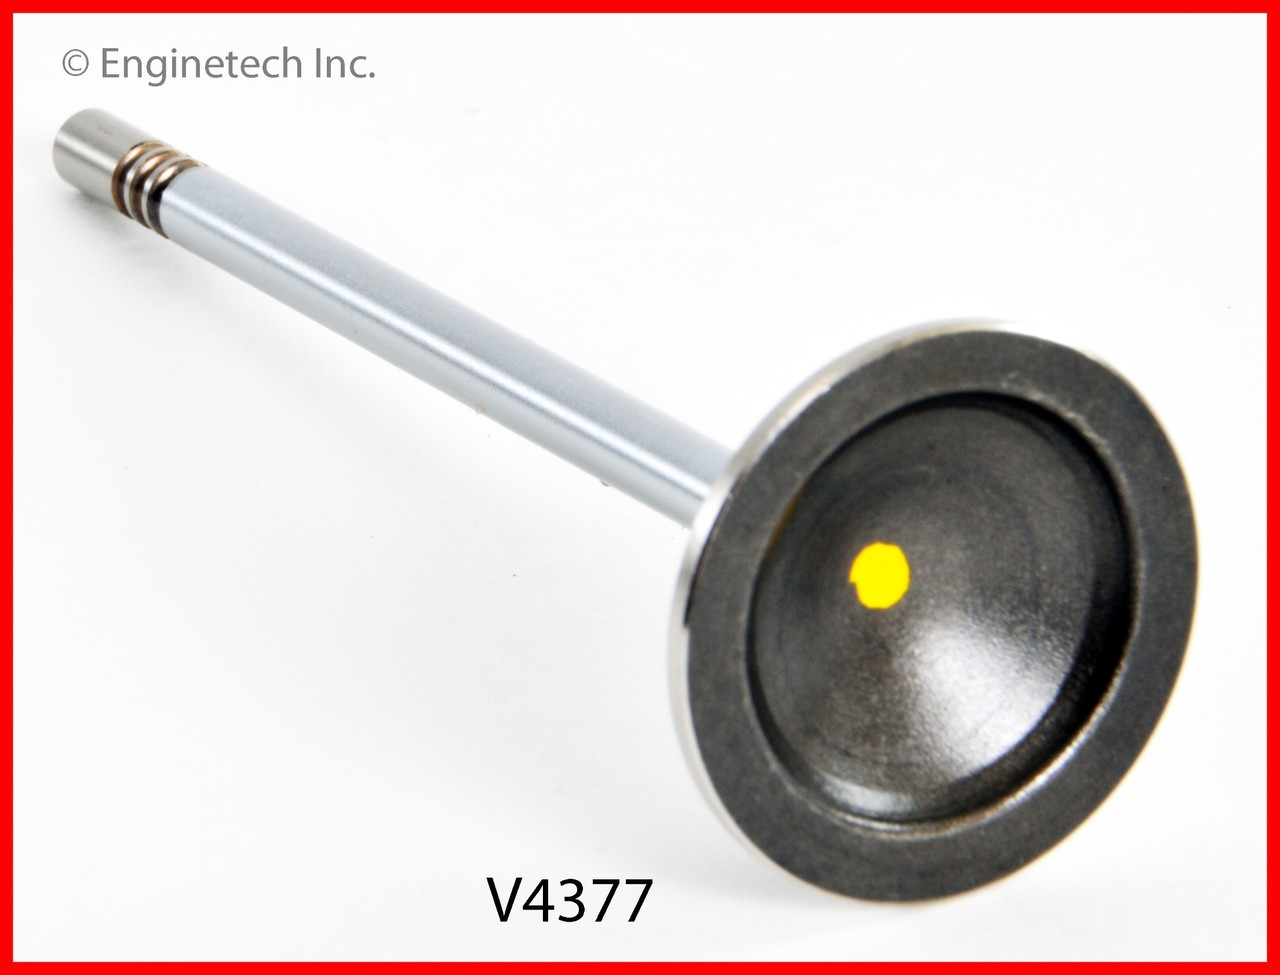 Exhaust Valve - 2011 Ford F-450 Super Duty 6.8L (V4377.H78)